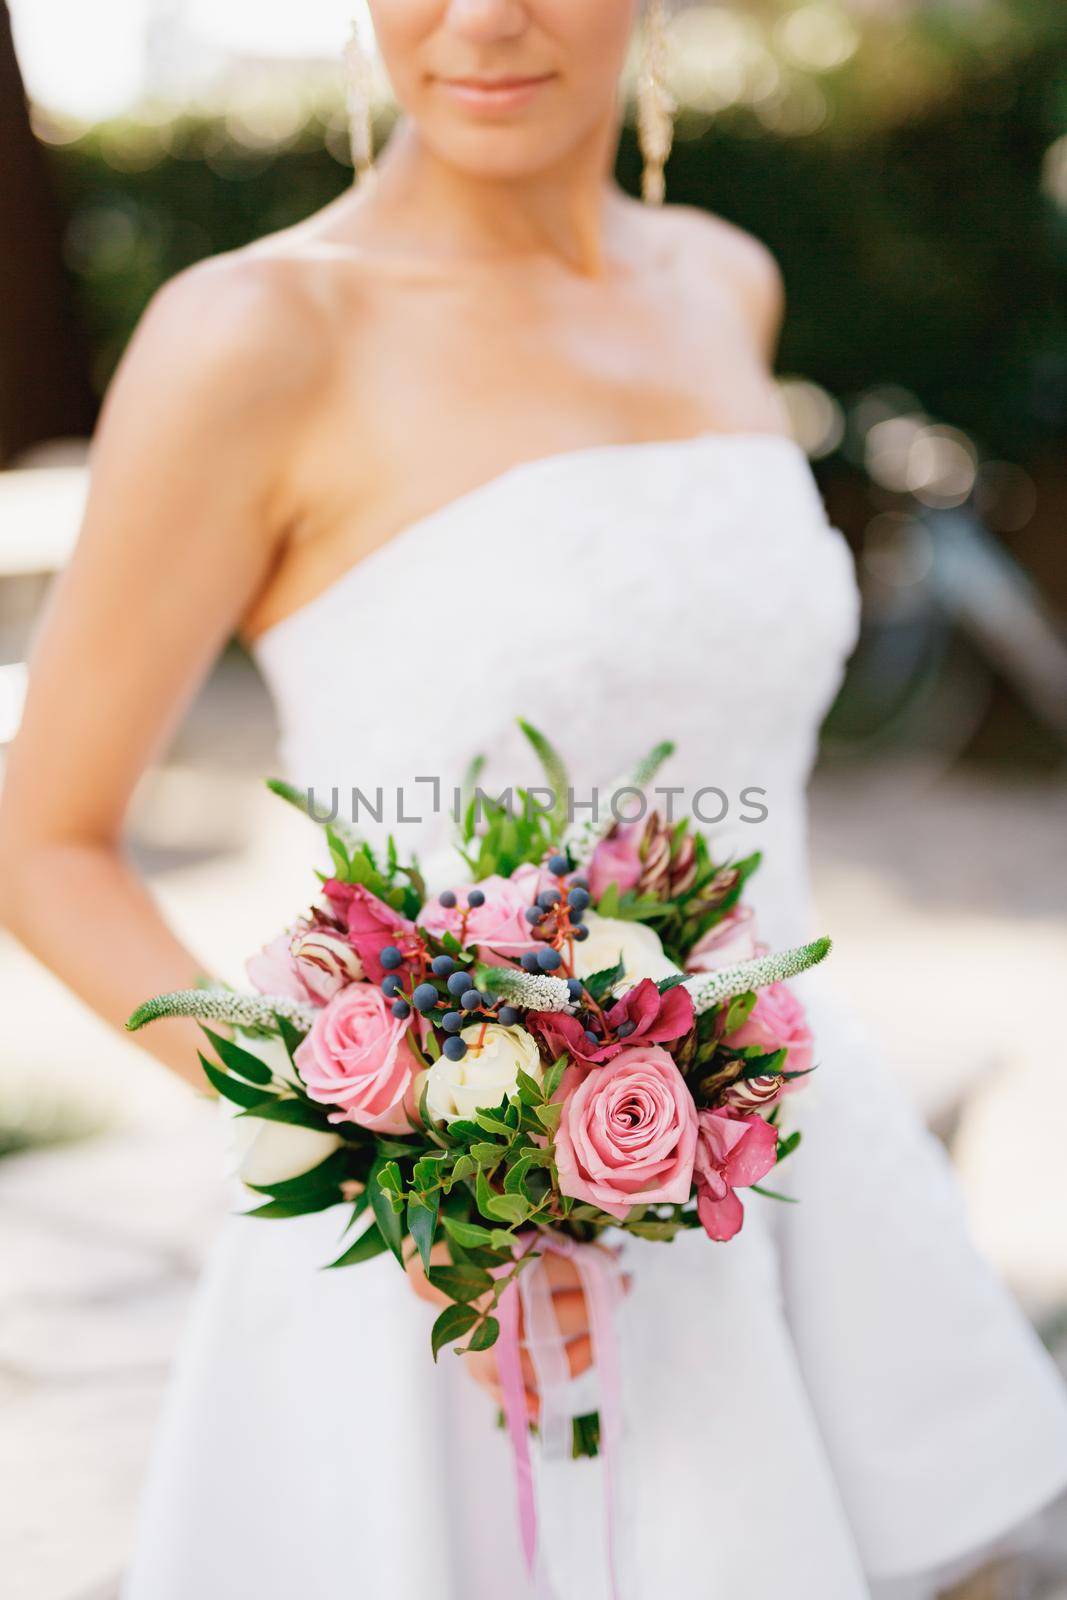 A sophisticated bride holding a wedding bouquet with roses, veronica, viburnum and boxwood in her hands, close-up . High quality photo